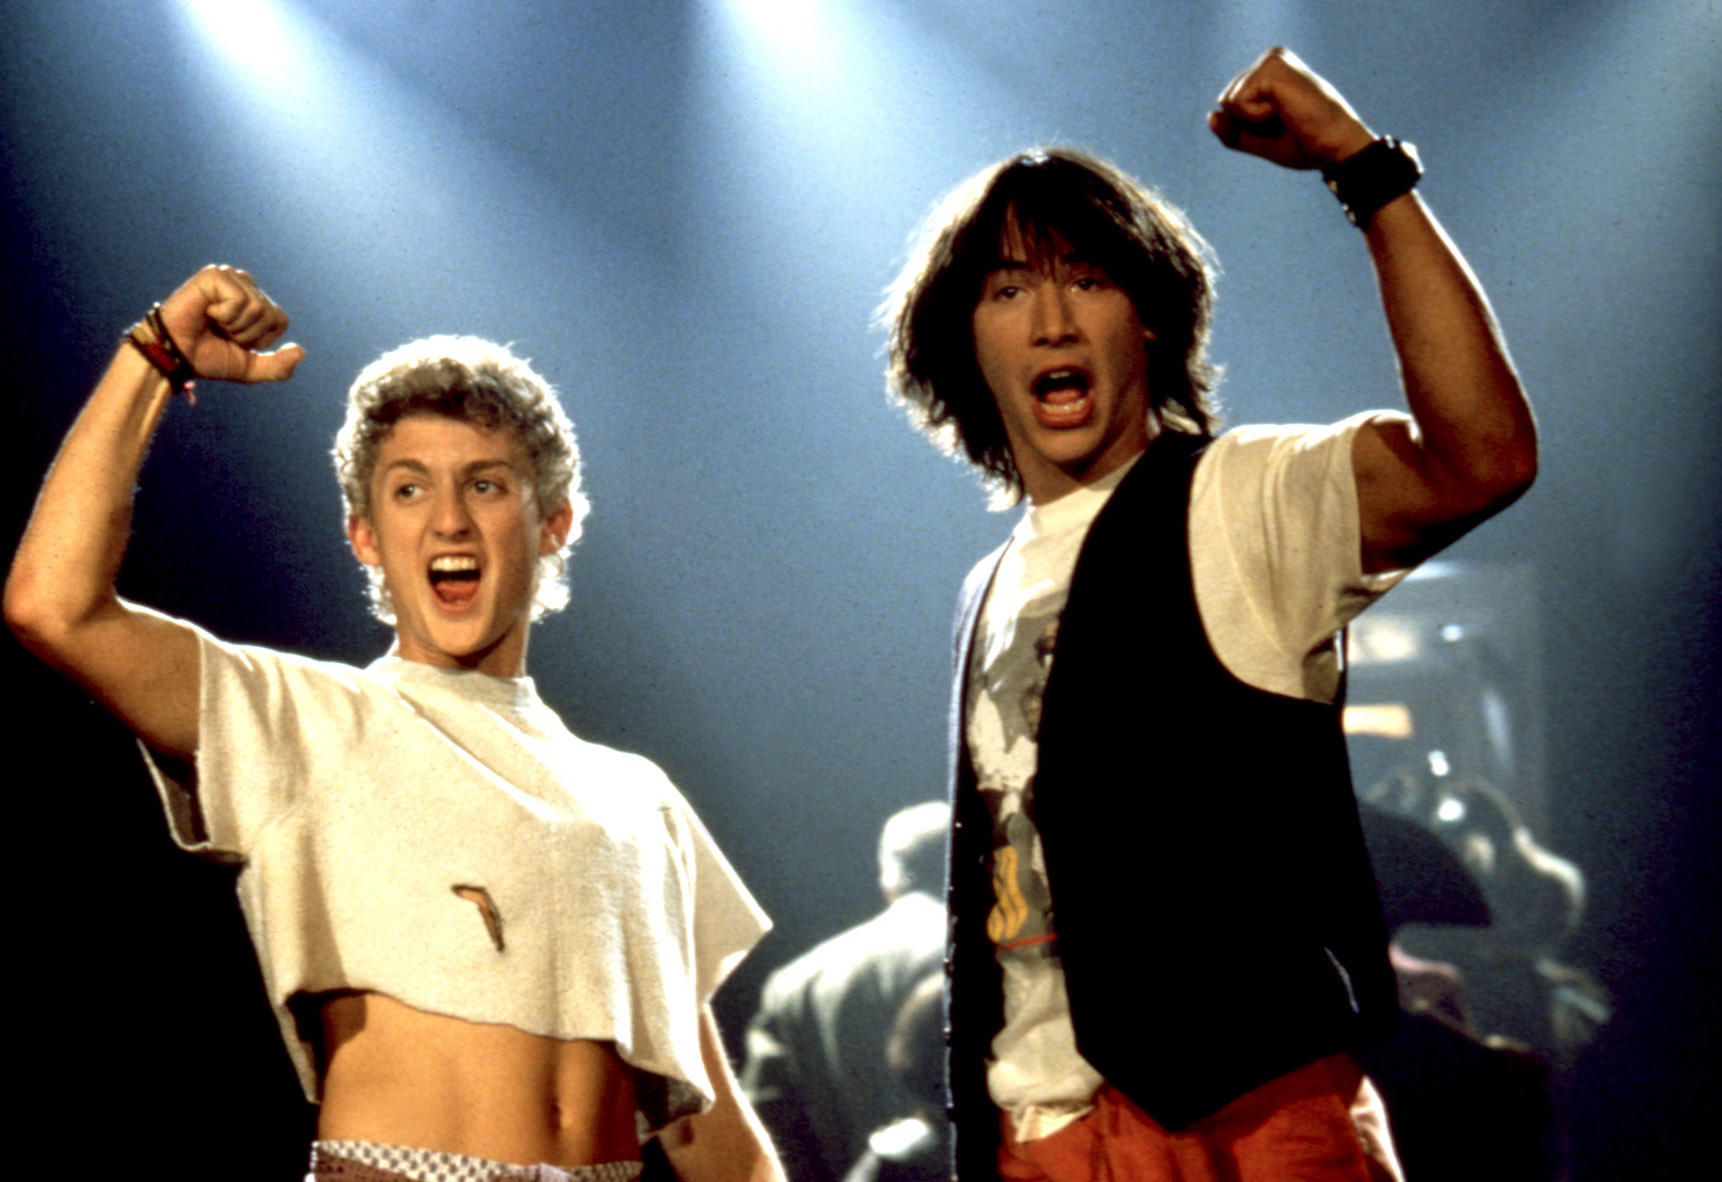 A still from Bill & Ted's Excellent Adventure that was released in 1989